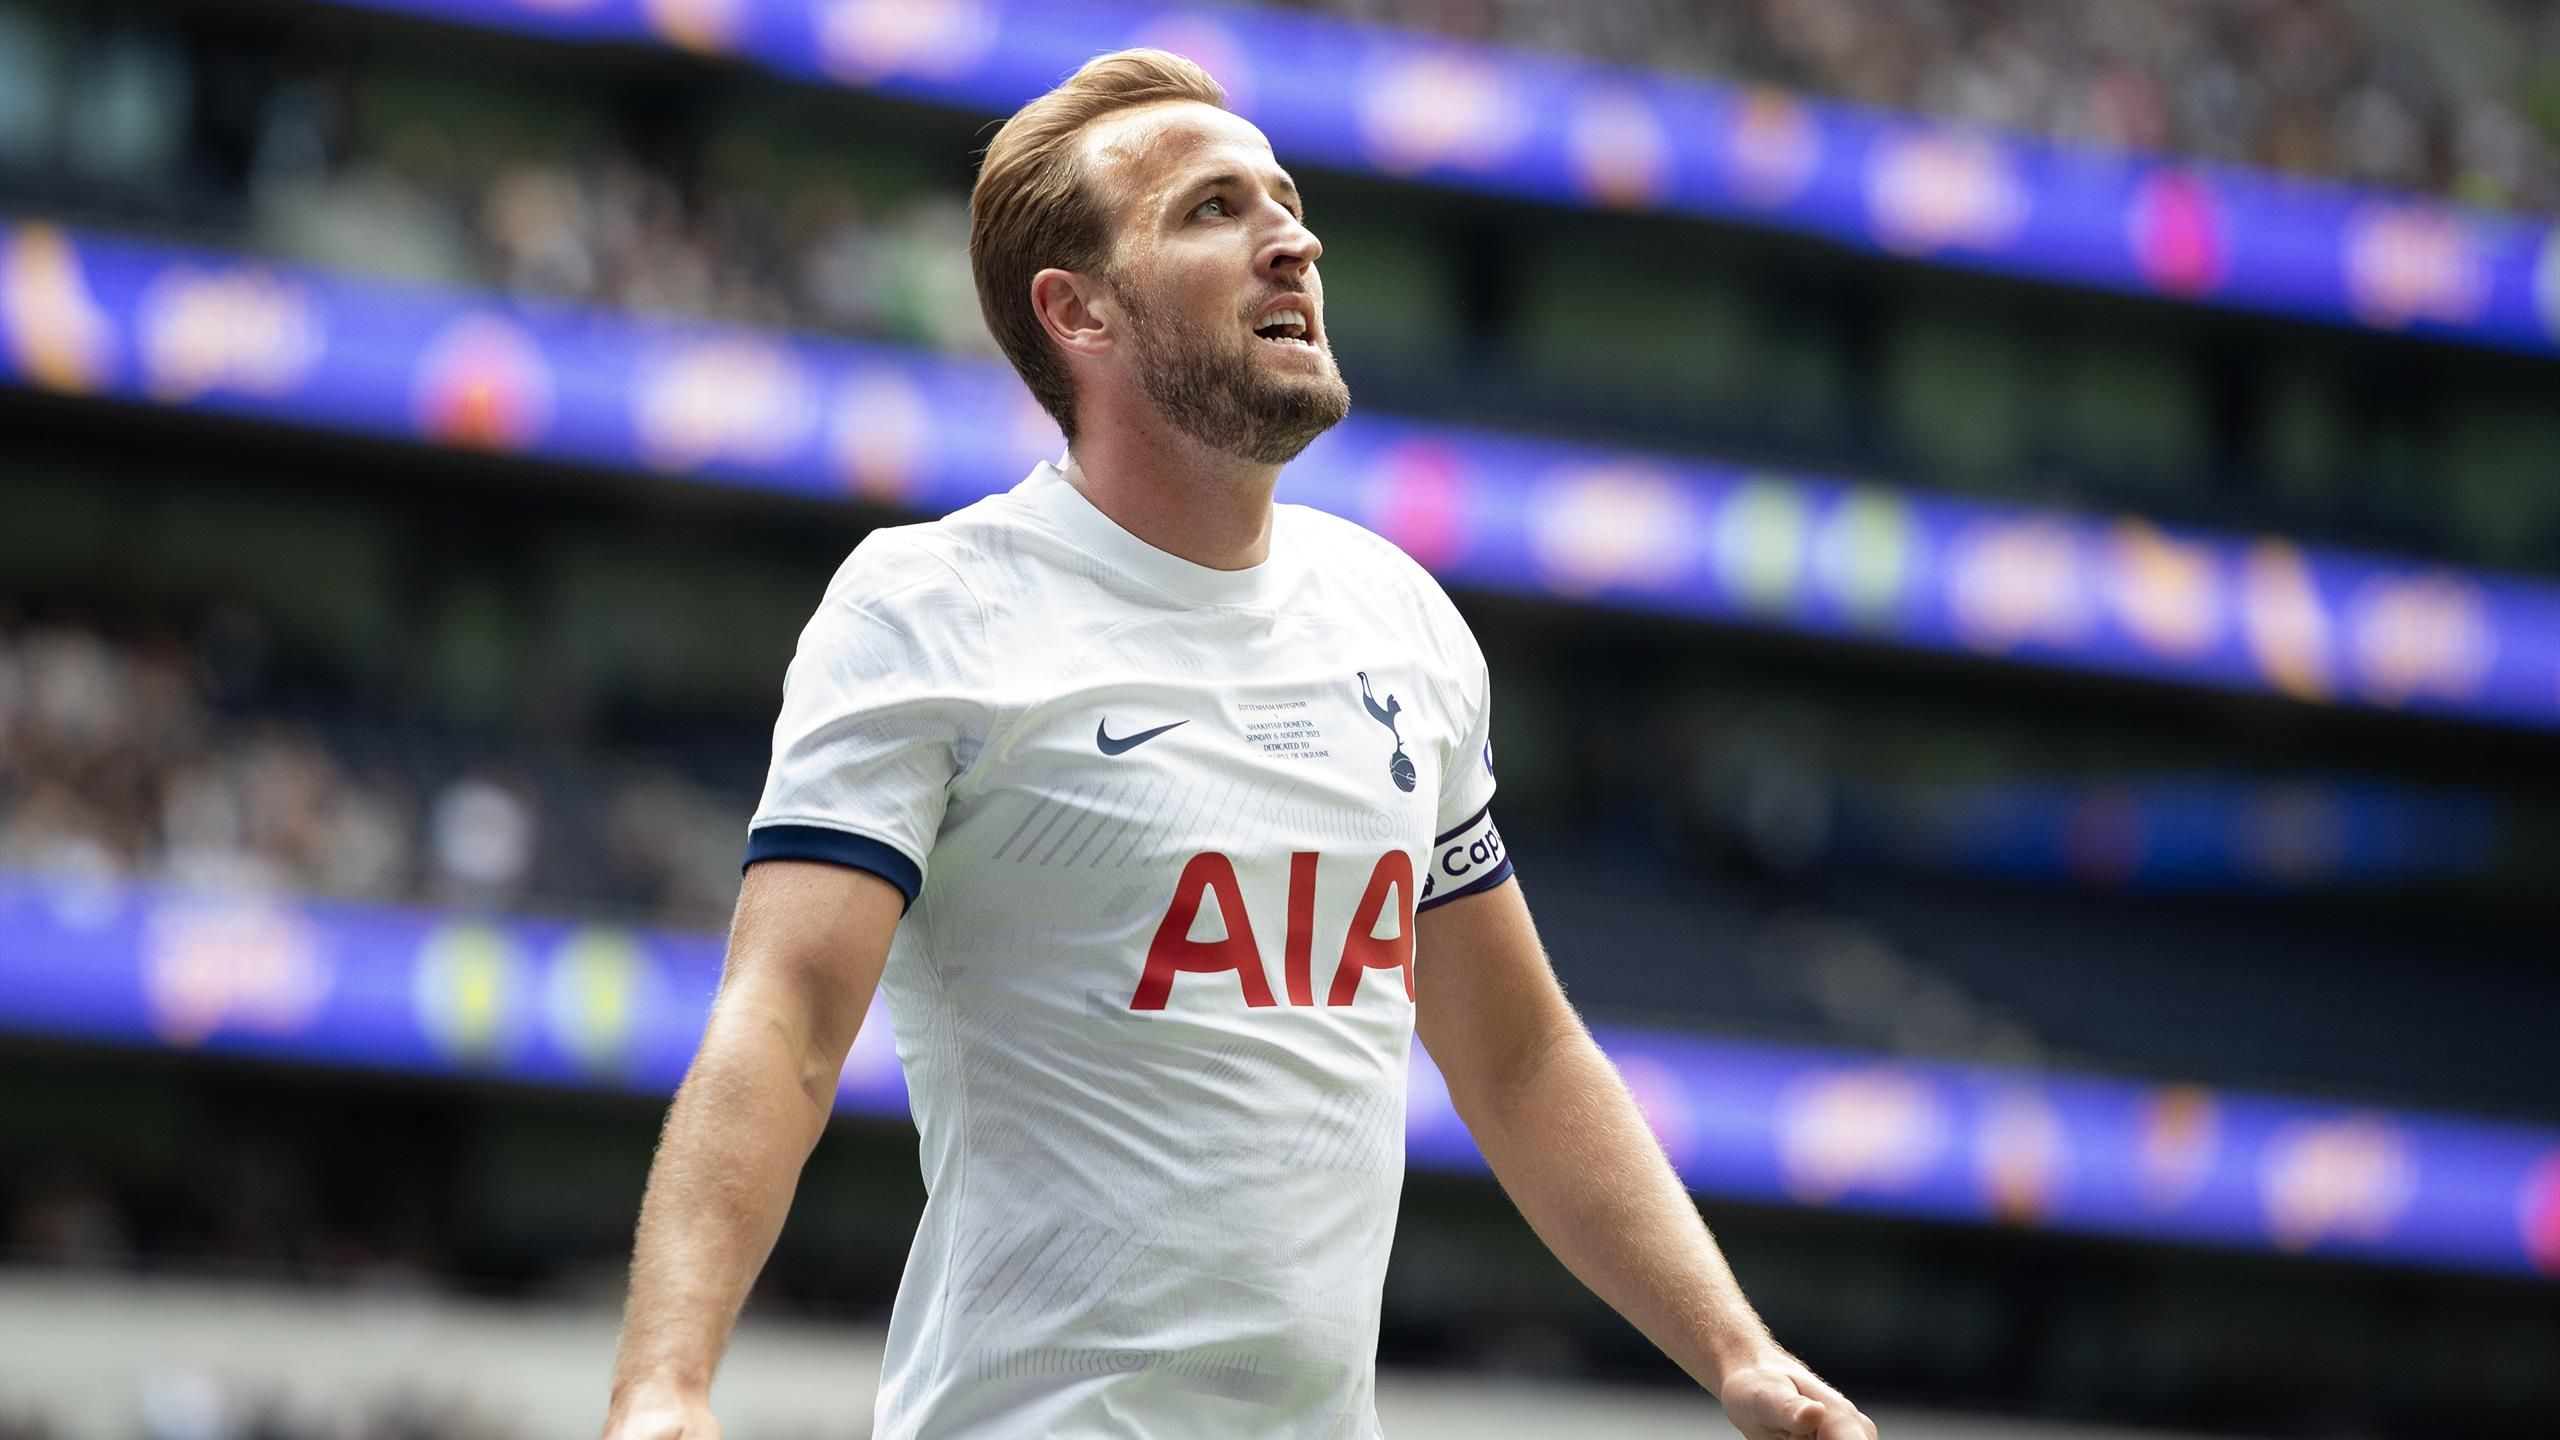 Bayern Munich Complete Signing Of Harry Kane From Tottenham Hotspur For £120m